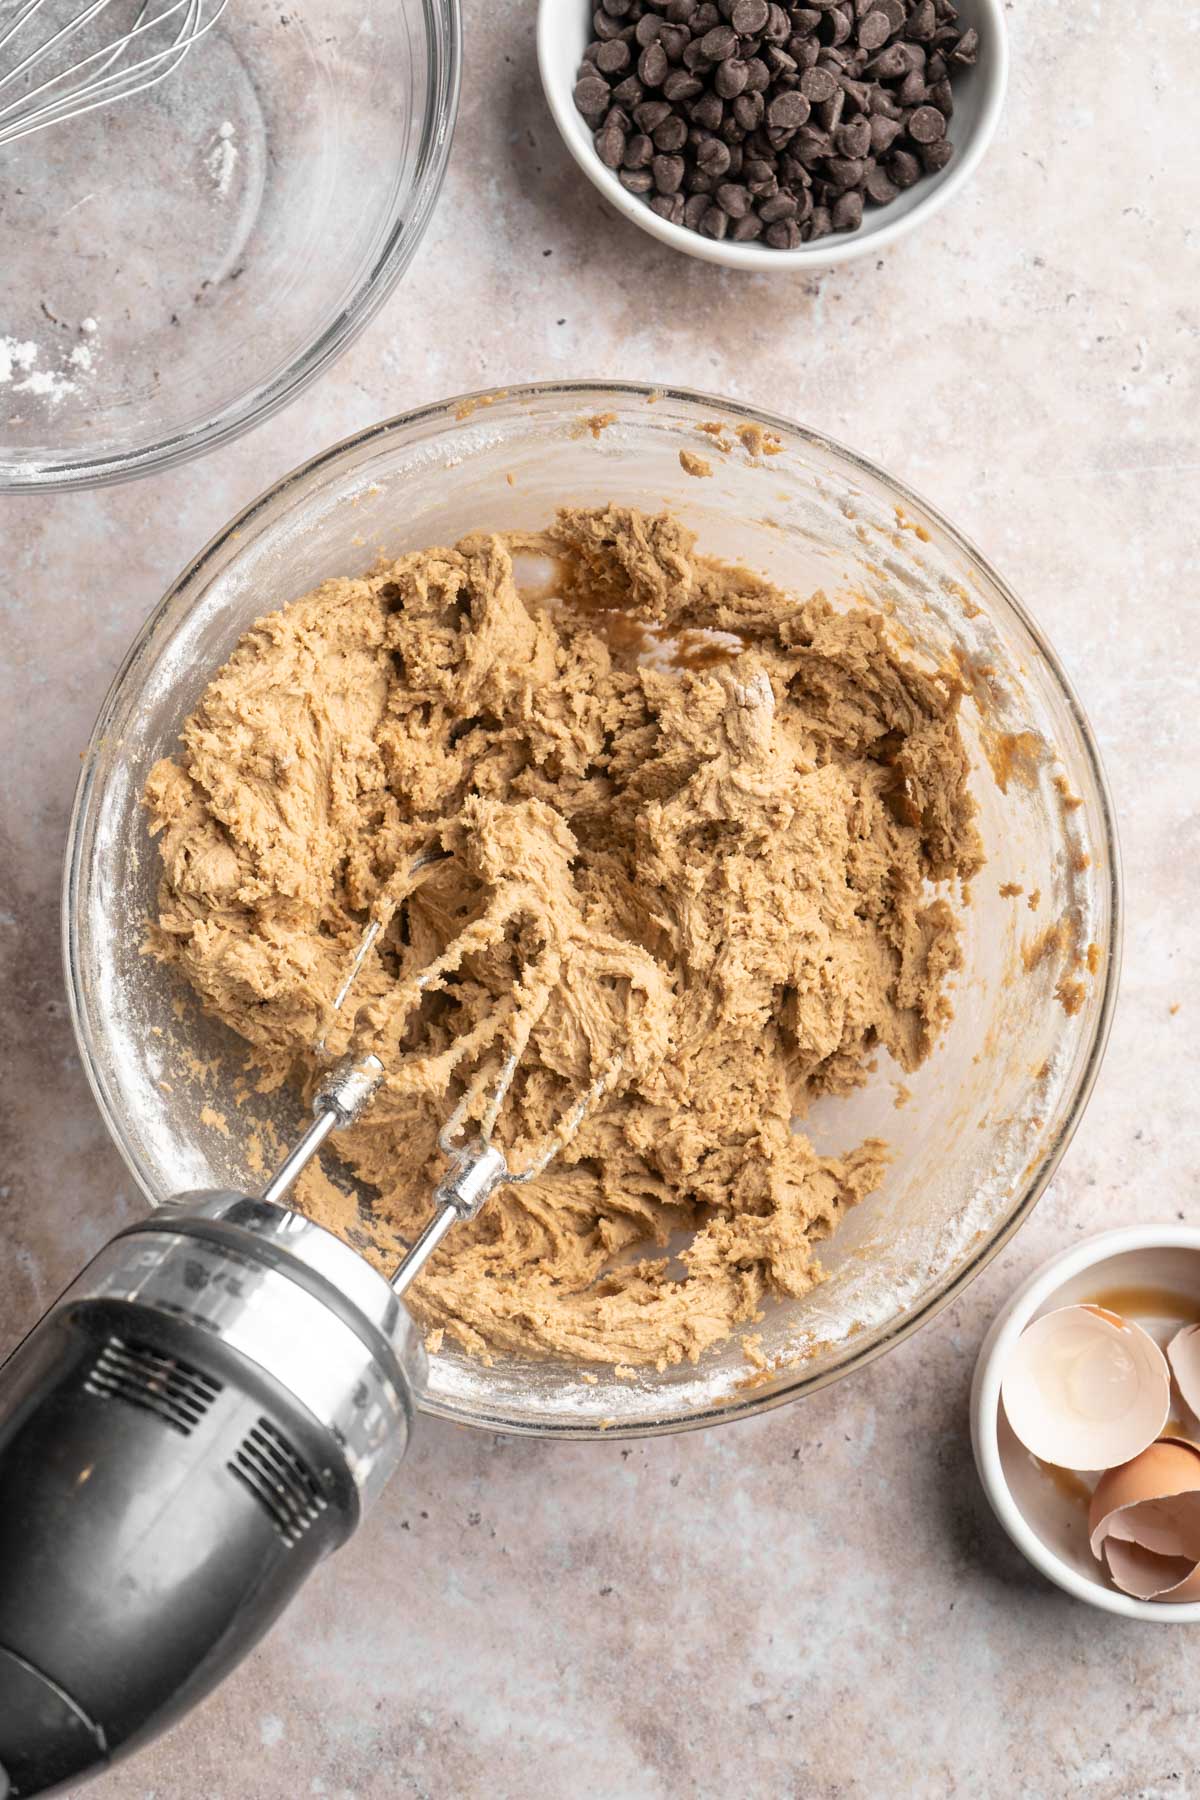 Using a hand mixer to mix cookie dough.